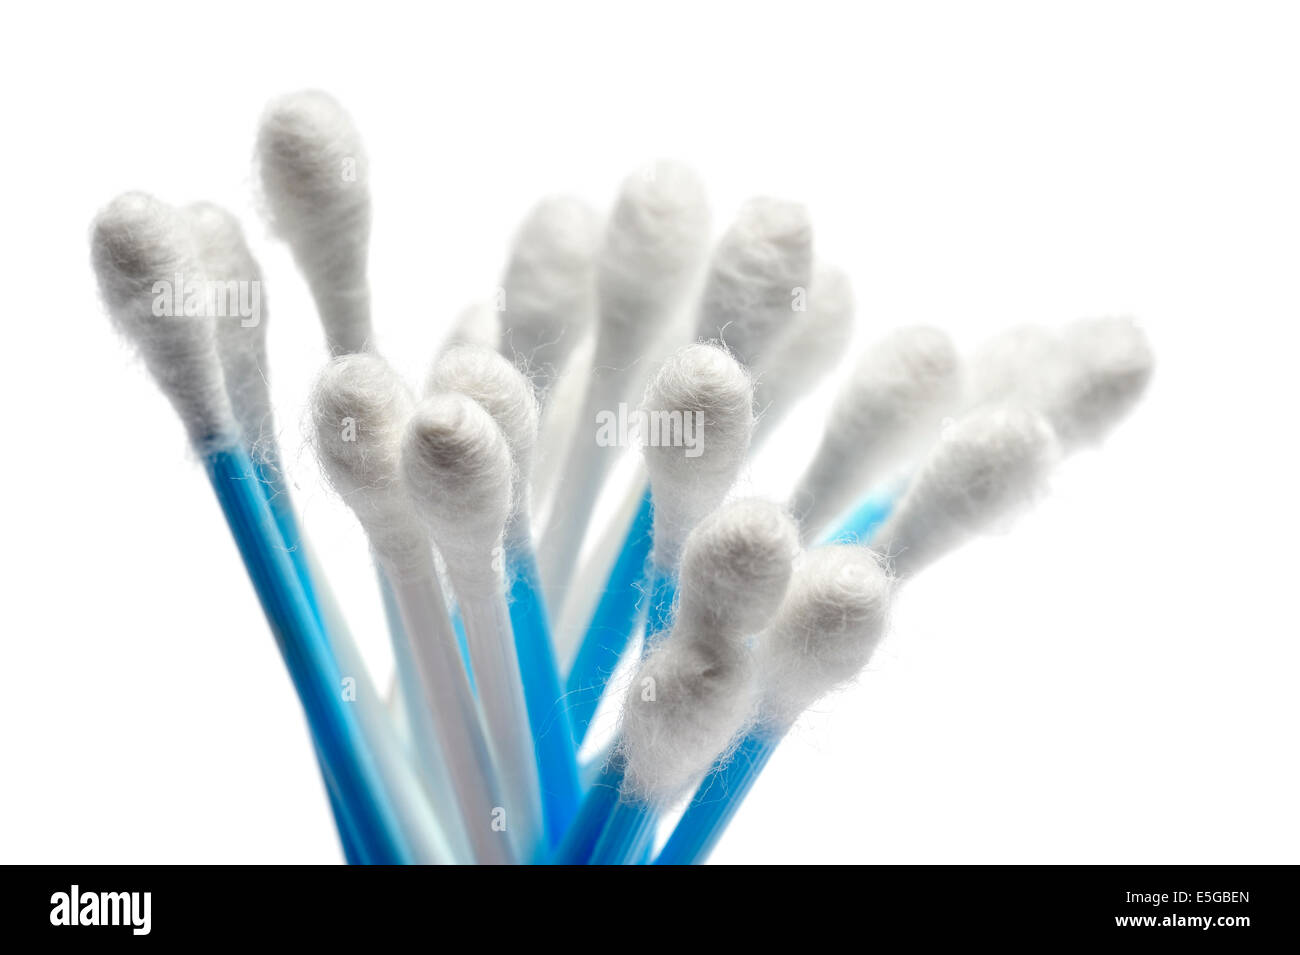 cotton swab for personal care, isolated on white Stock Photo